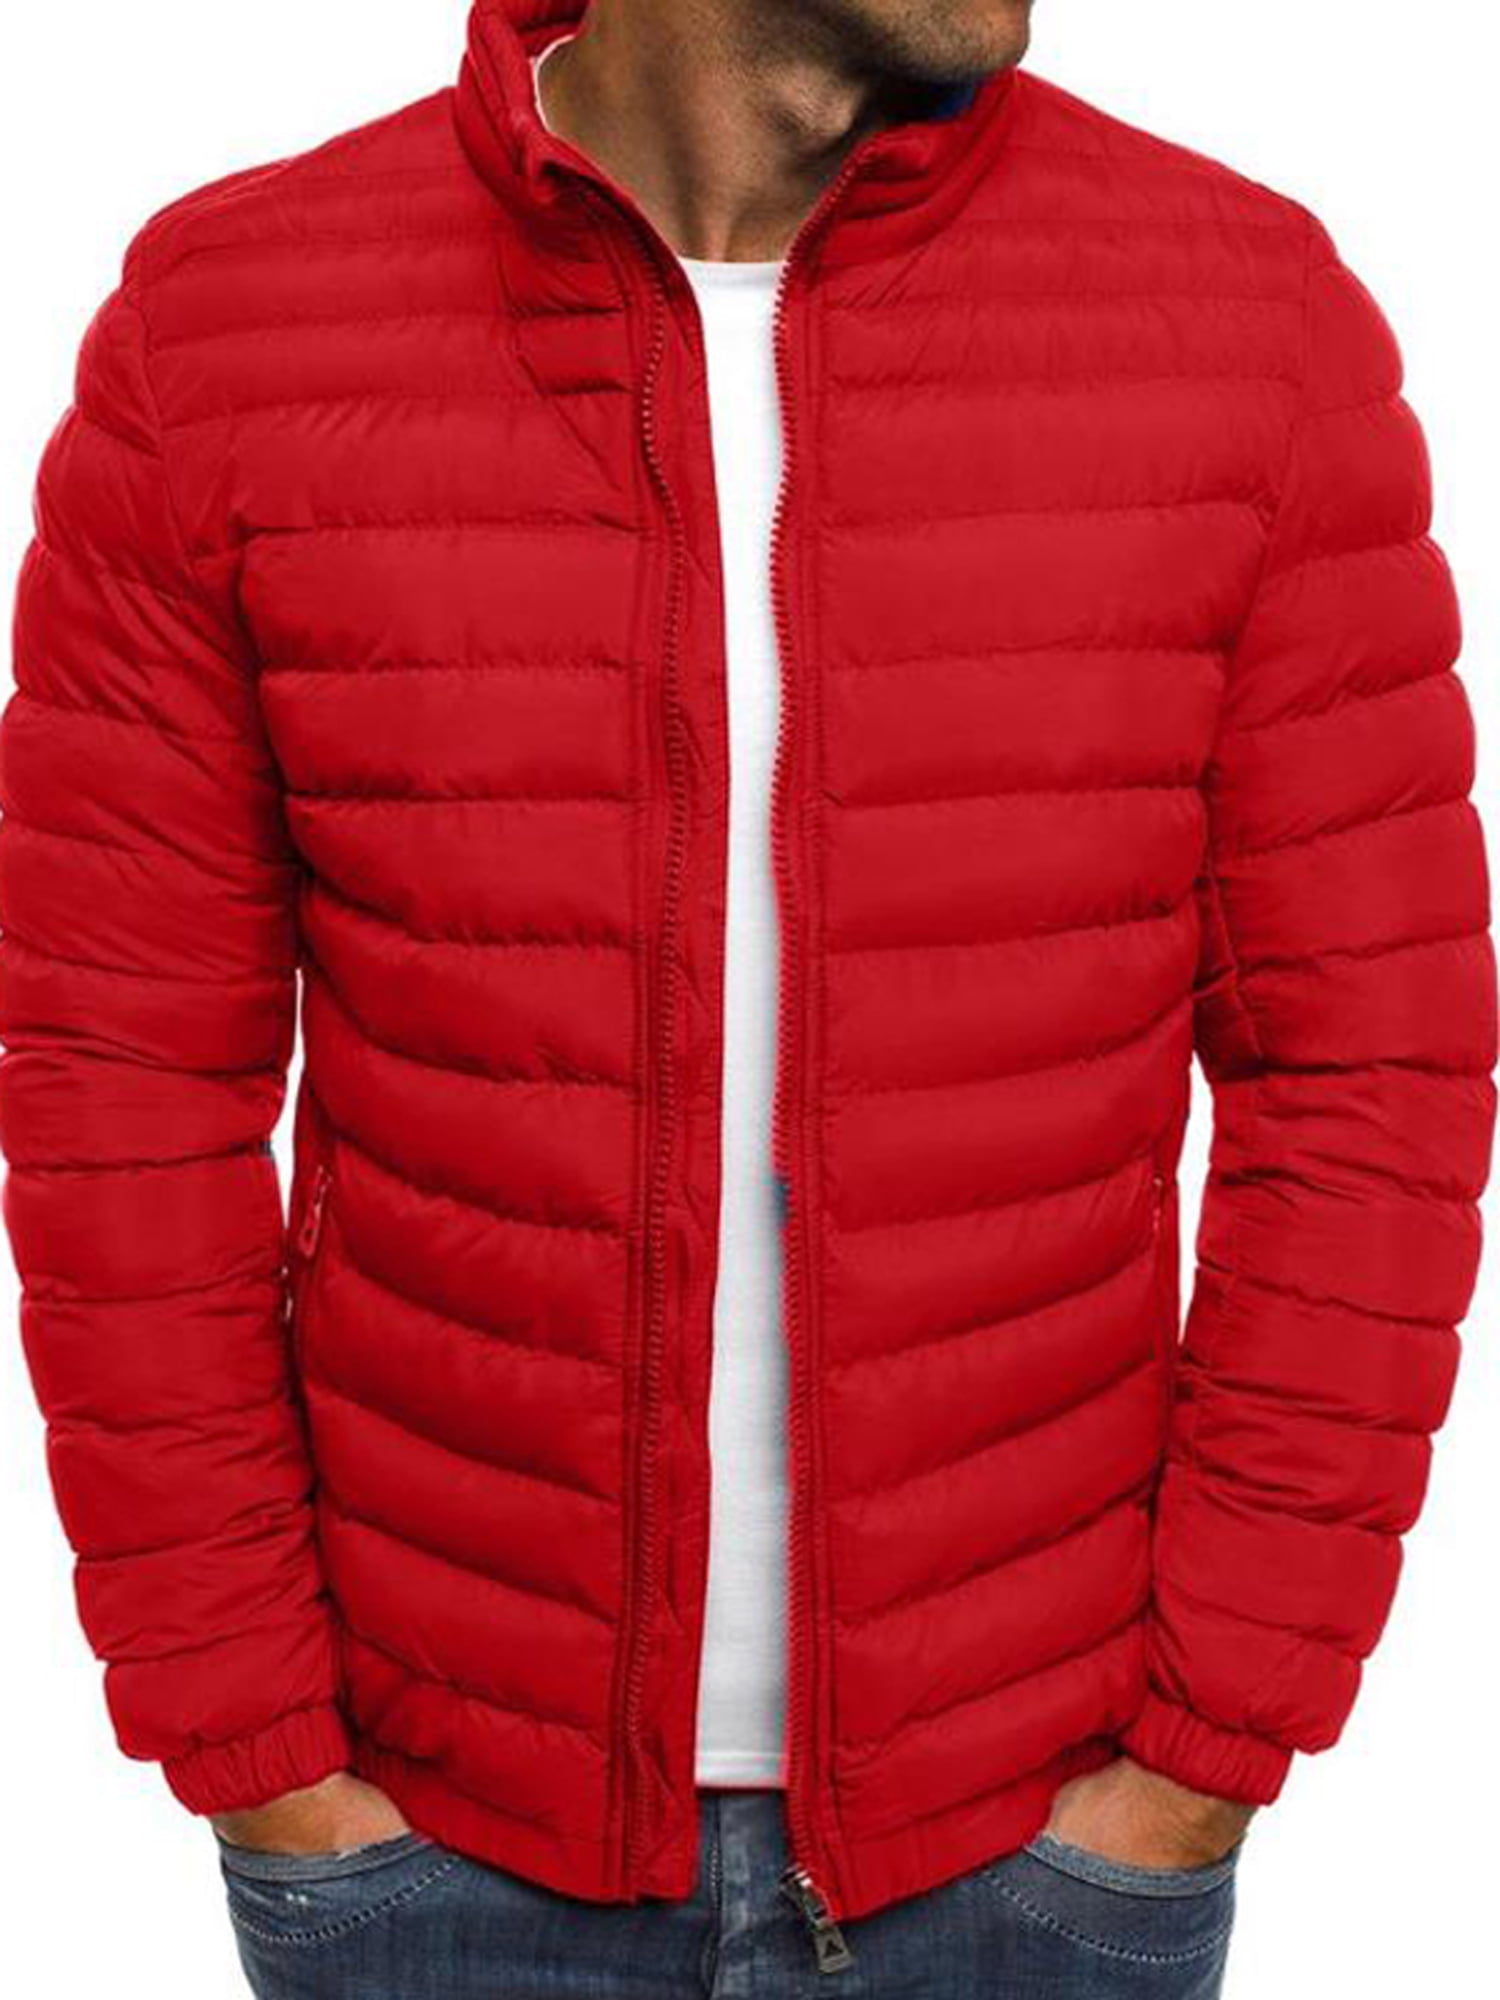 Men's Winter Puffer Bubble Jackets Quilted Padded Outerwear Skiing Warm ...